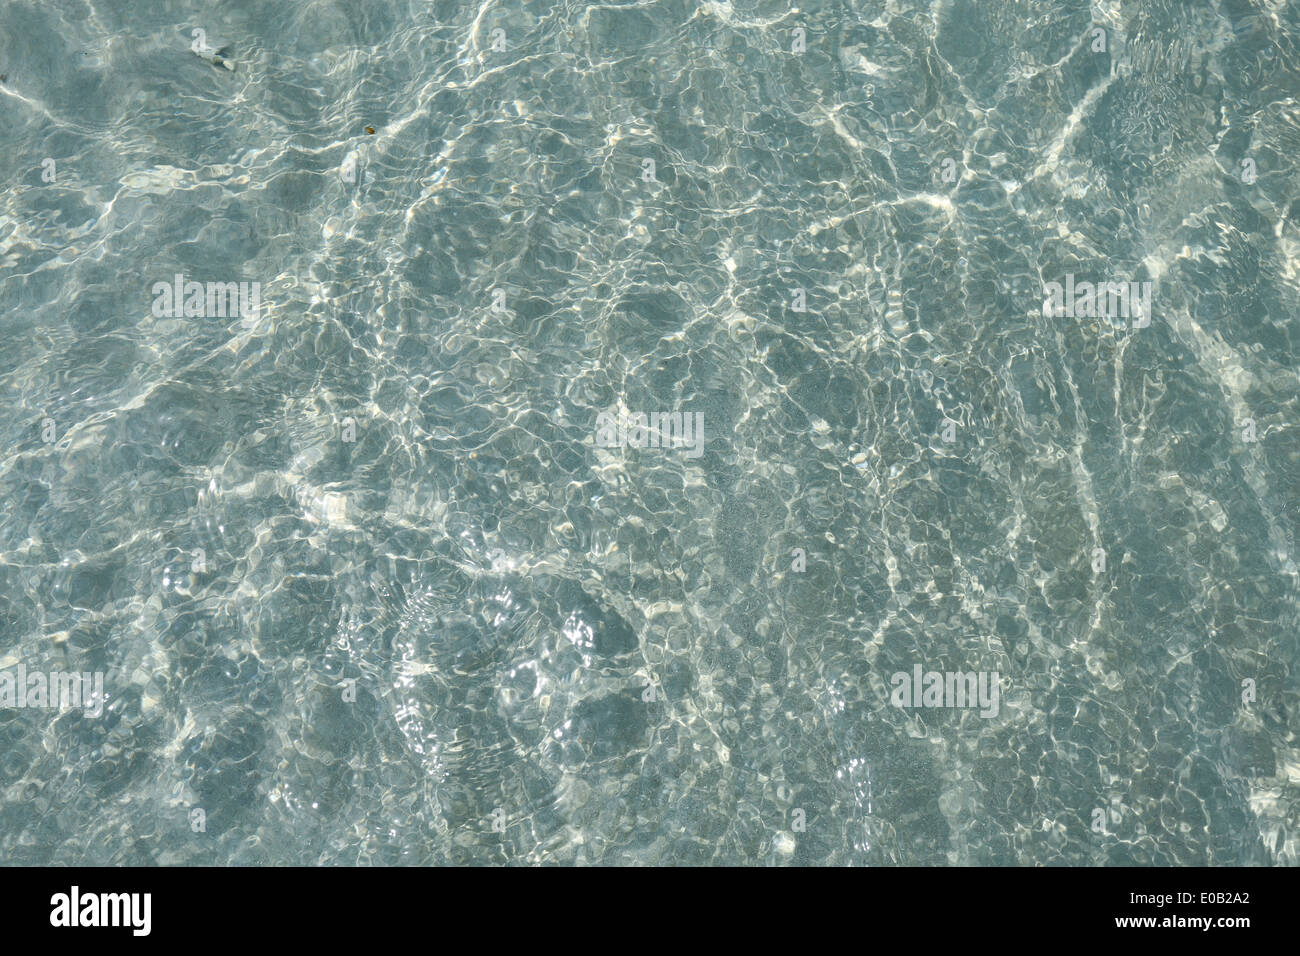 The texture of the sea water is photographed close-up Stock Photo